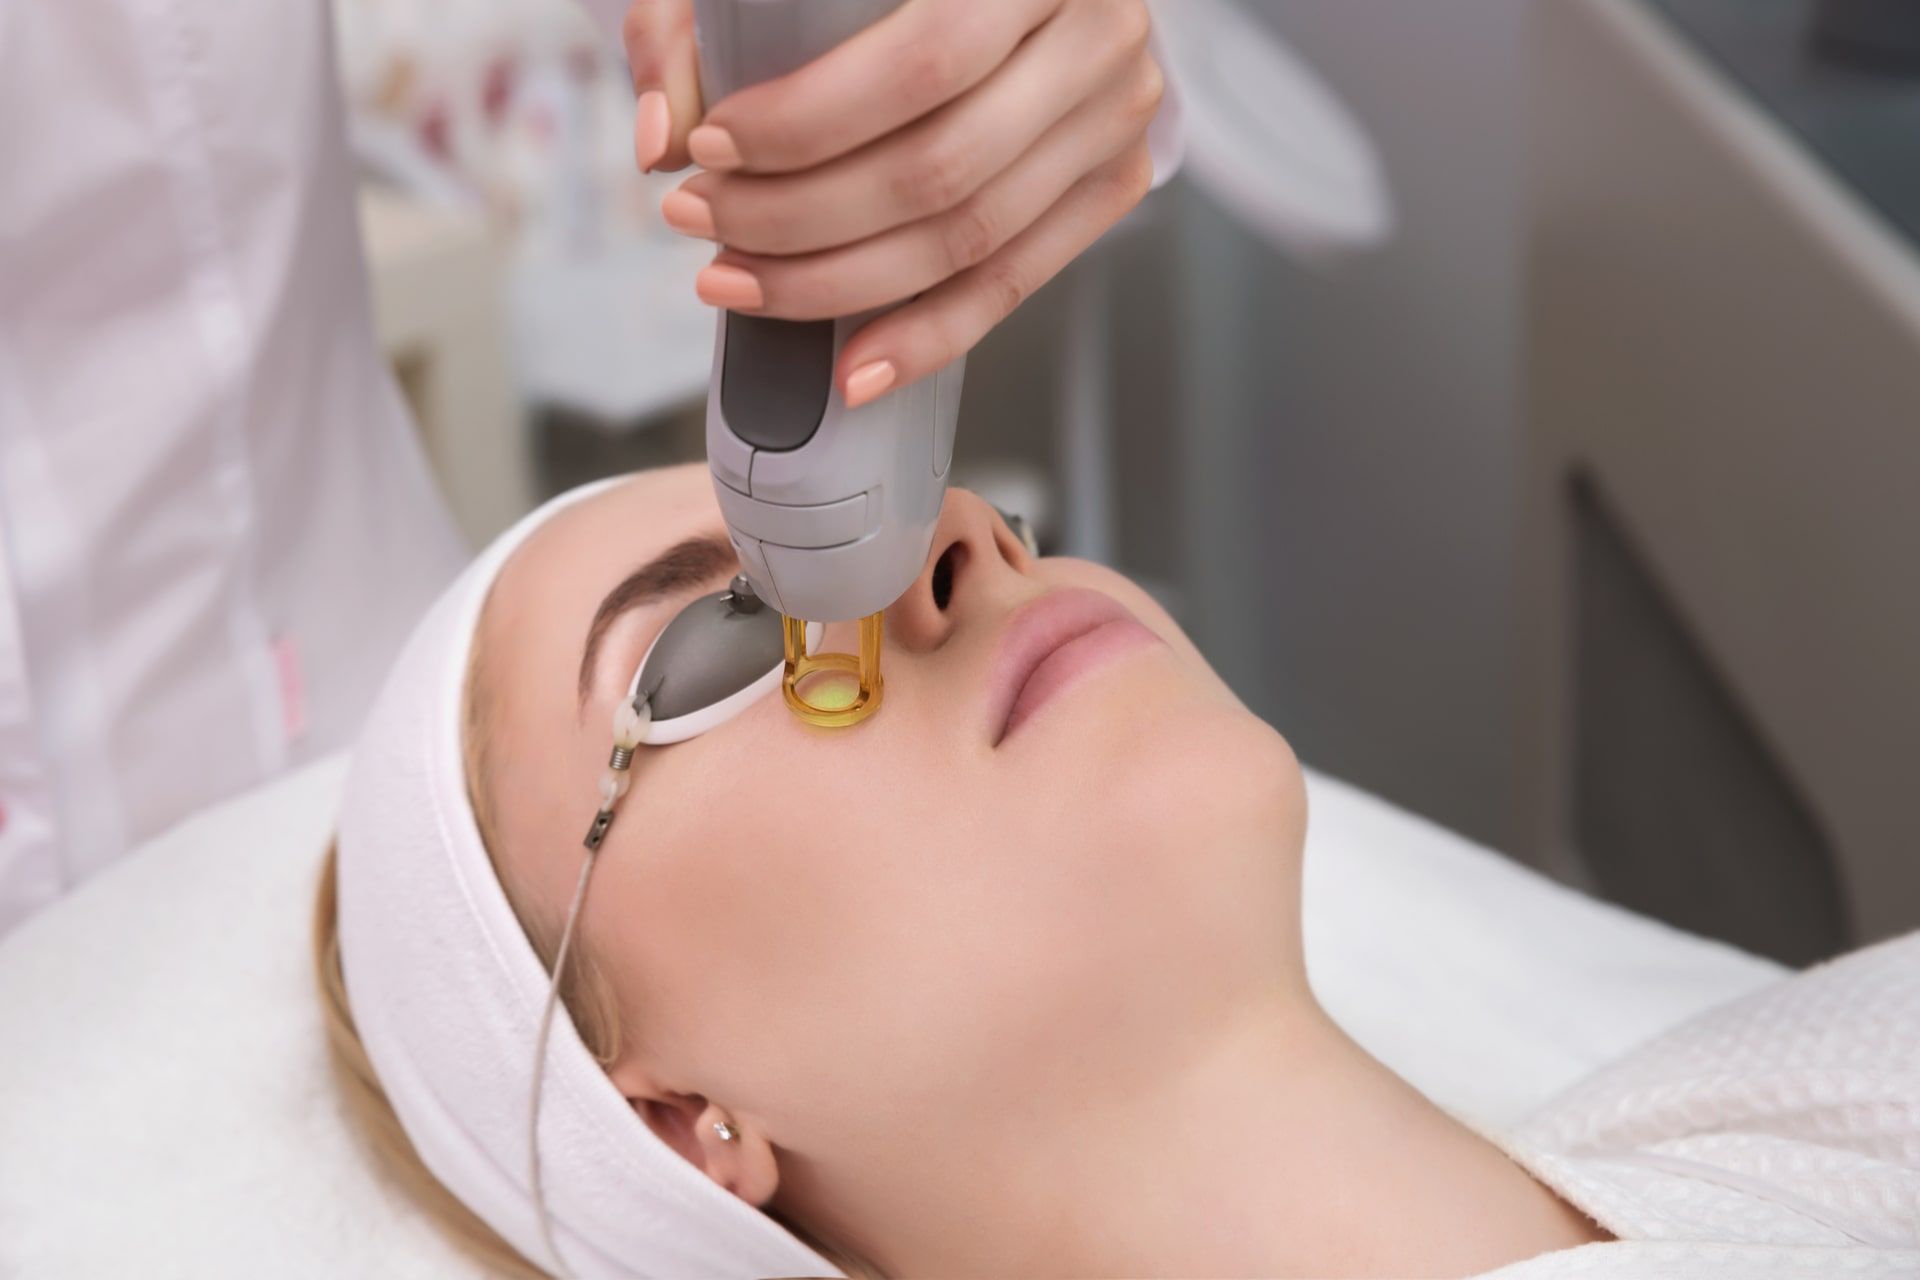 Therapist beautician makes a laser treatment to young woman's face